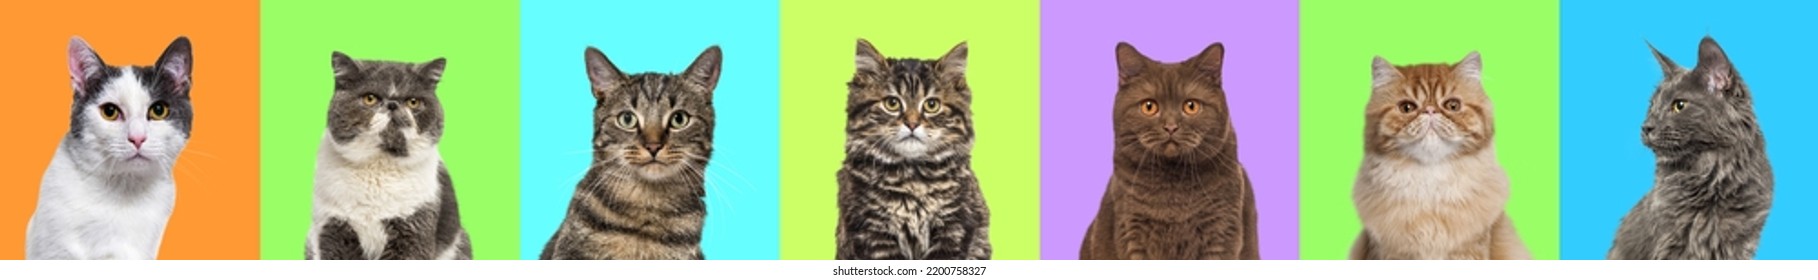 Banner, Collage Of Multiple Cats Head Portrait Photos On A Multicolored Background Of A Multitude Of Different Bright Colors. 